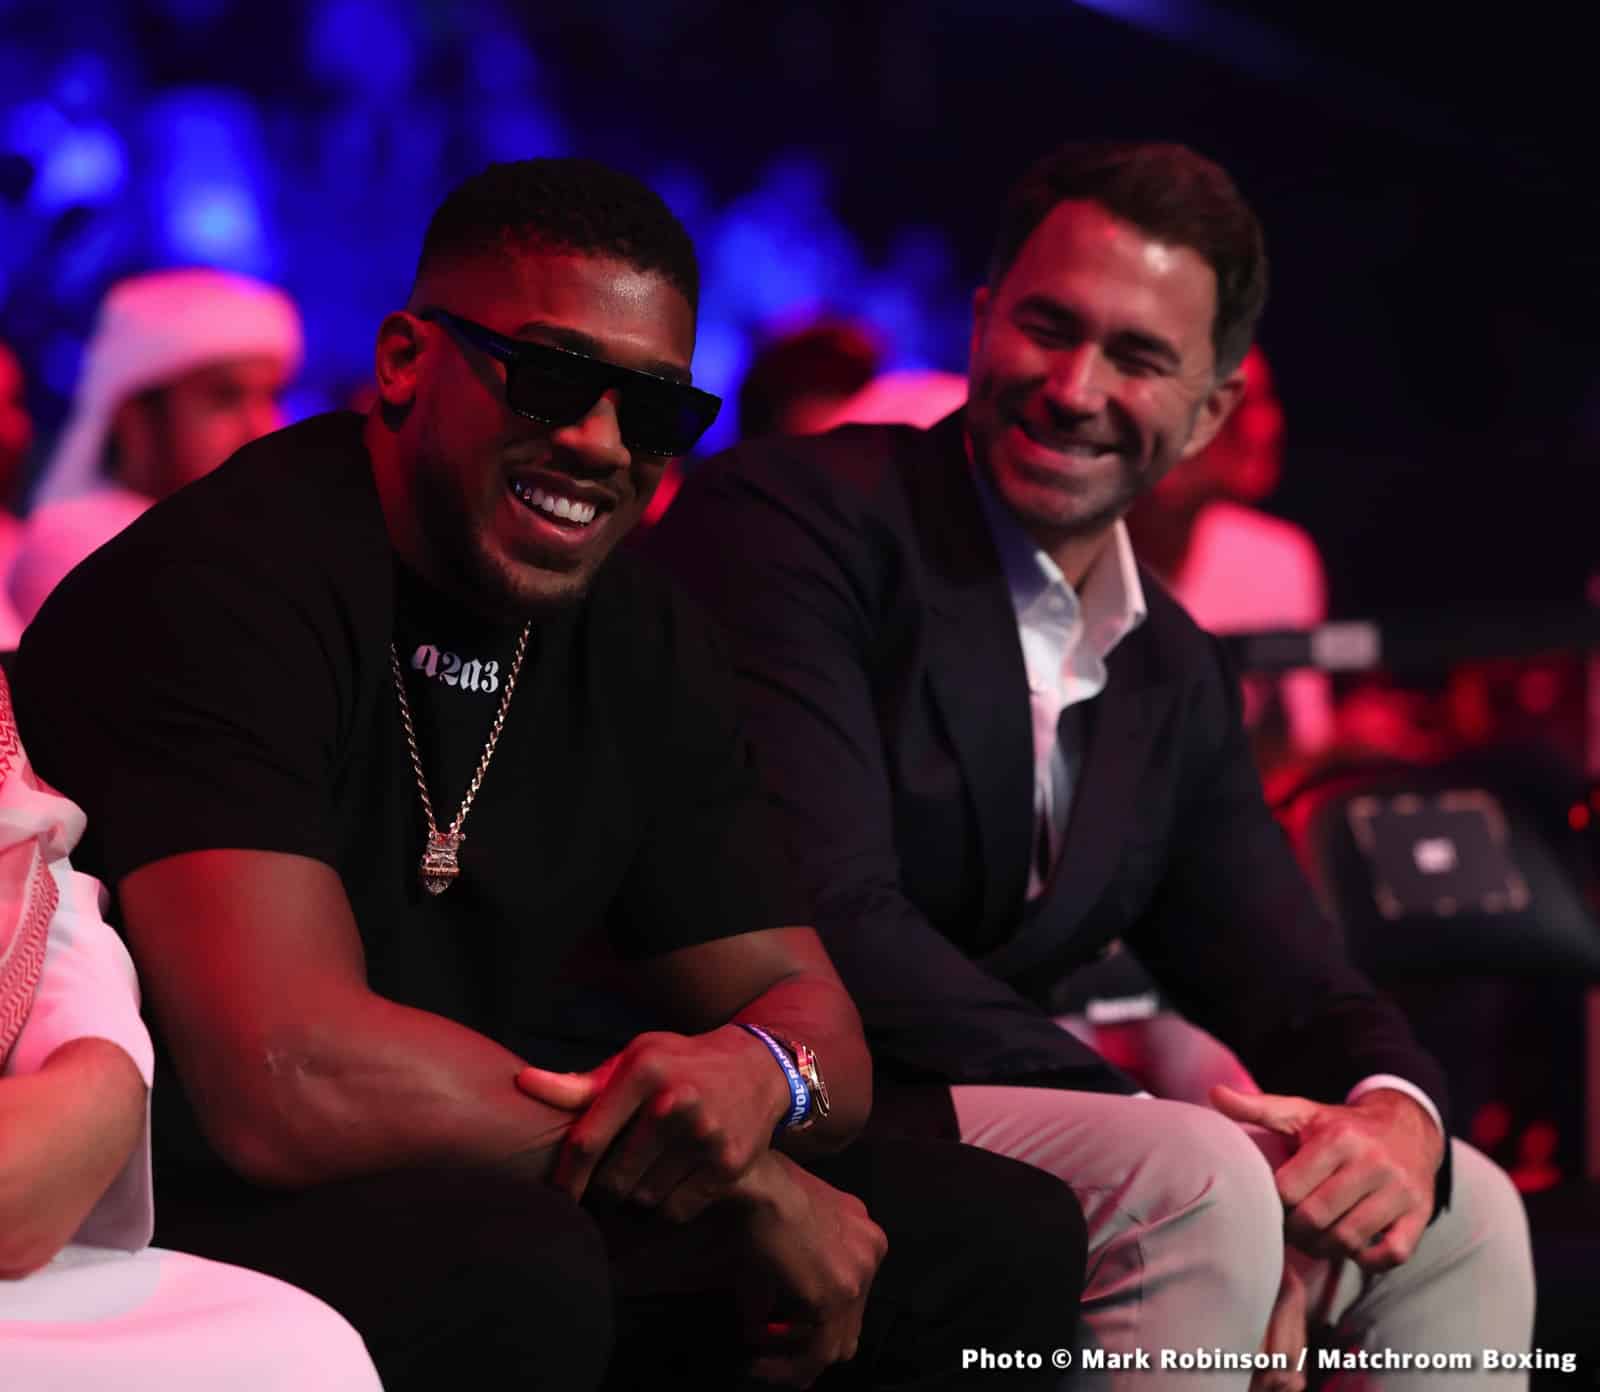 Anthony Joshua Vs. Dillian Whyte 2: Do Fans Still Want This Fight?